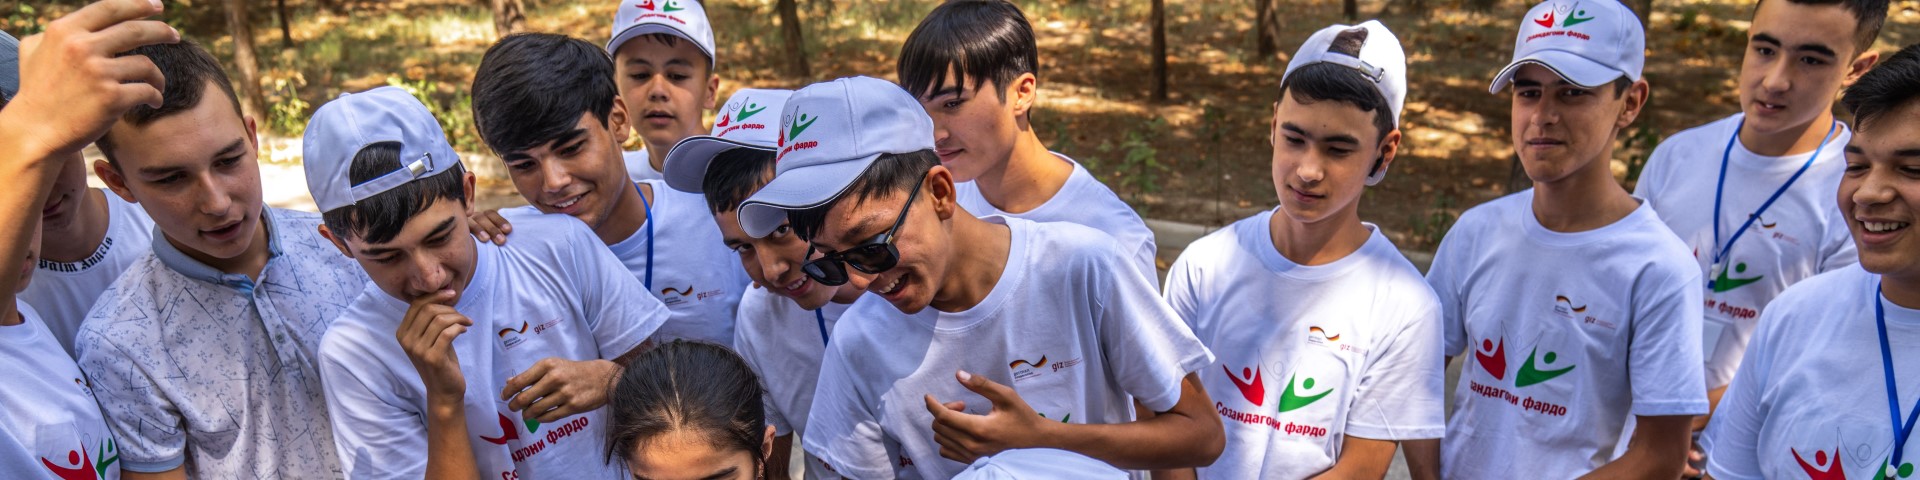 Young people take part in games at a youth camp in Tajikistan.